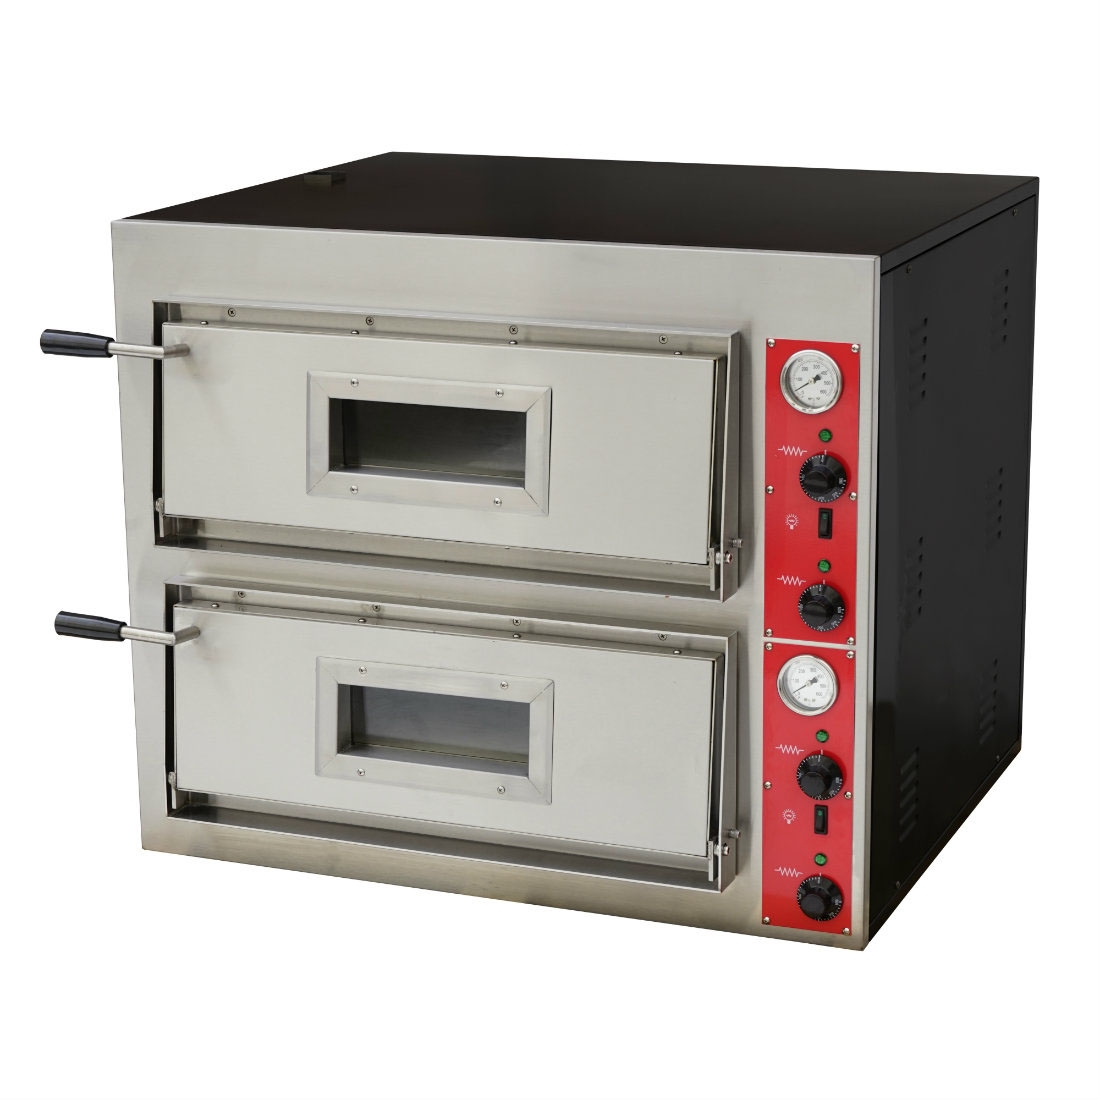 Black Panther Pizza Deck Oven